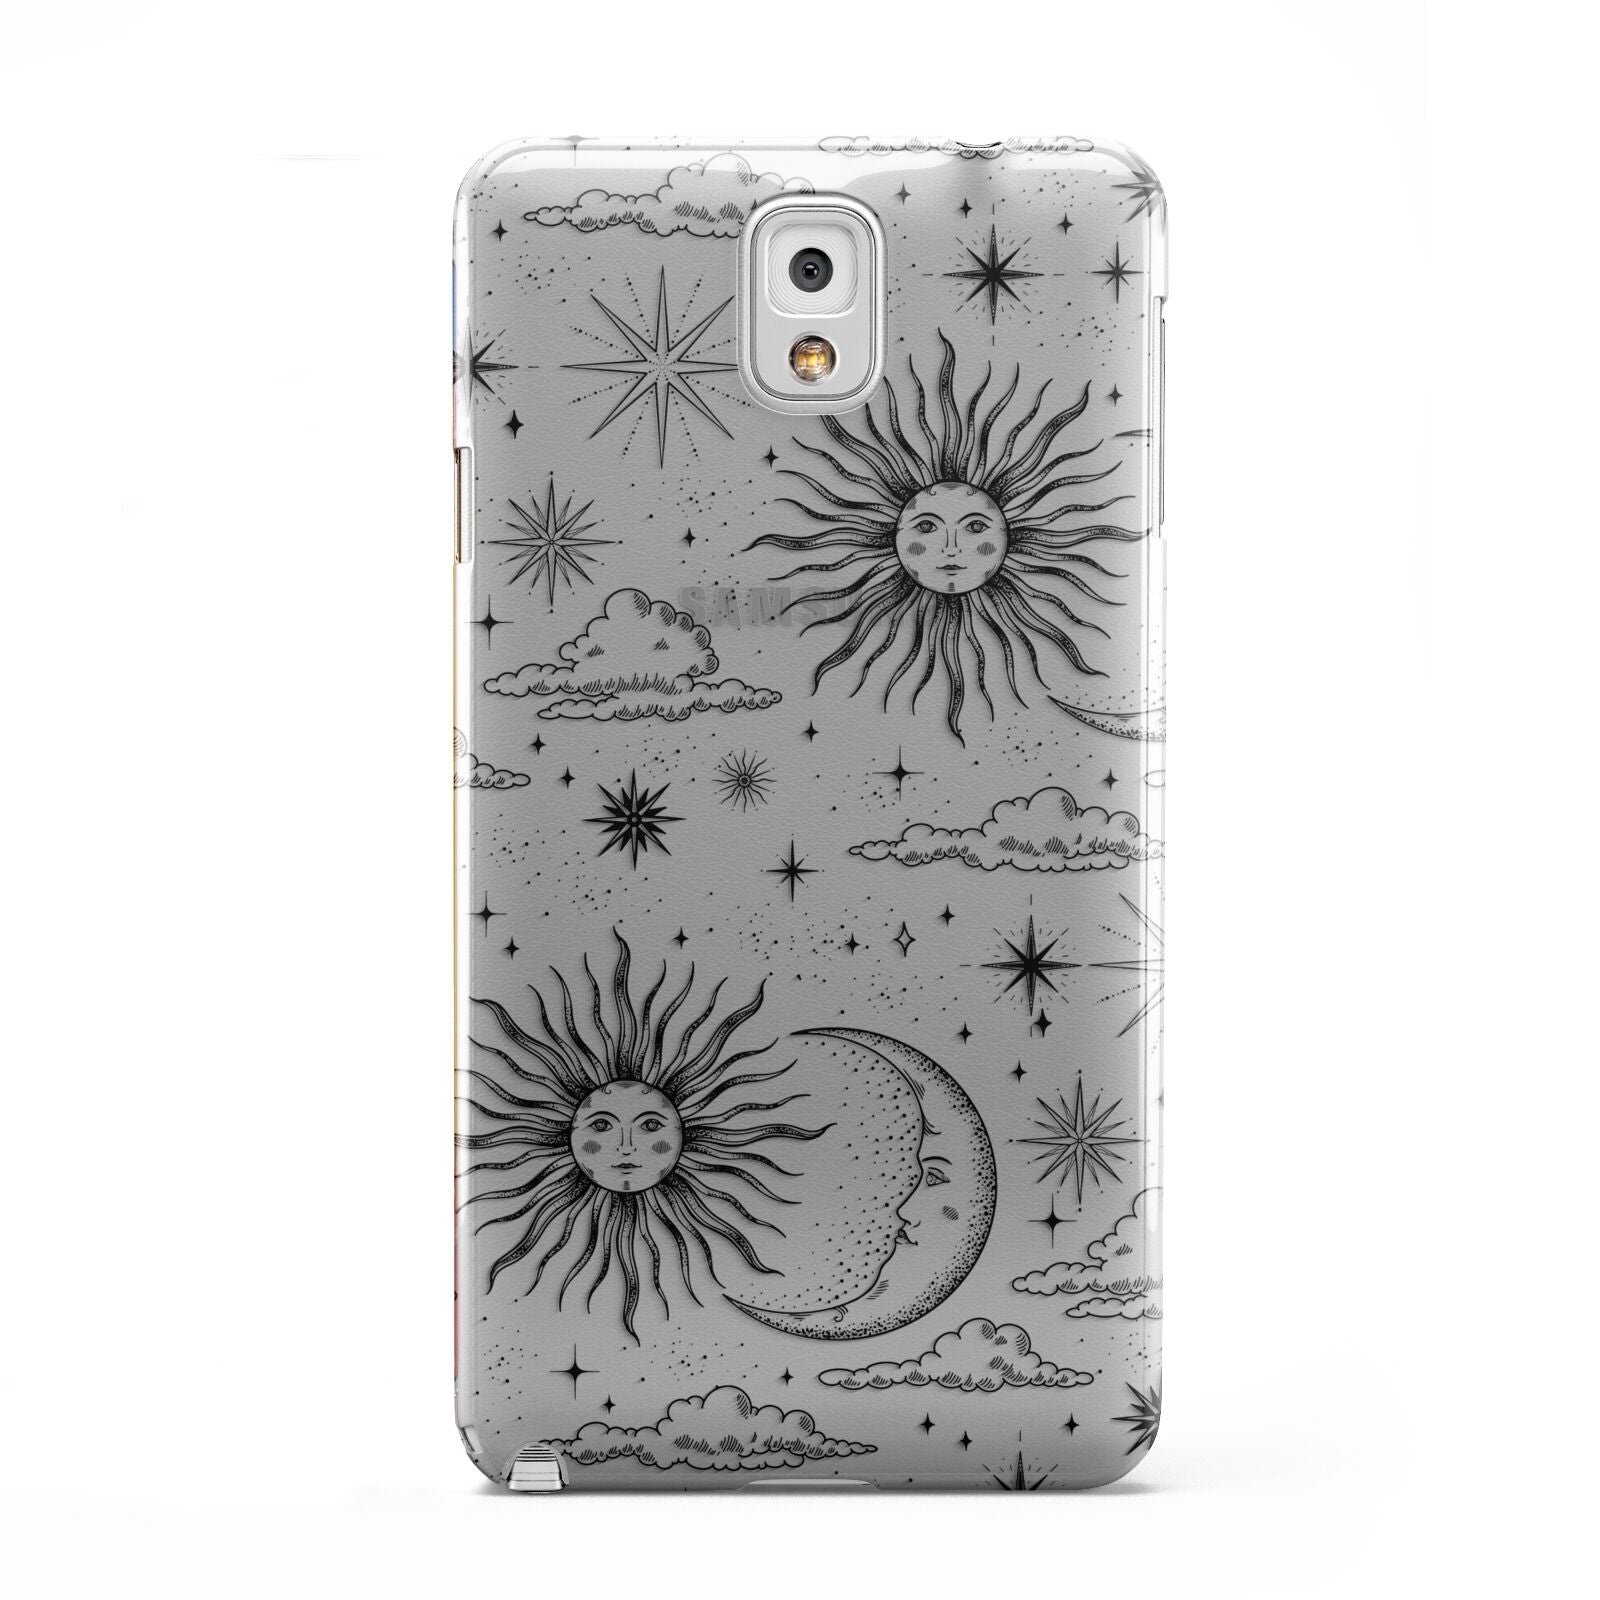 Celestial Suns Clouds Samsung Galaxy Note 3 Case